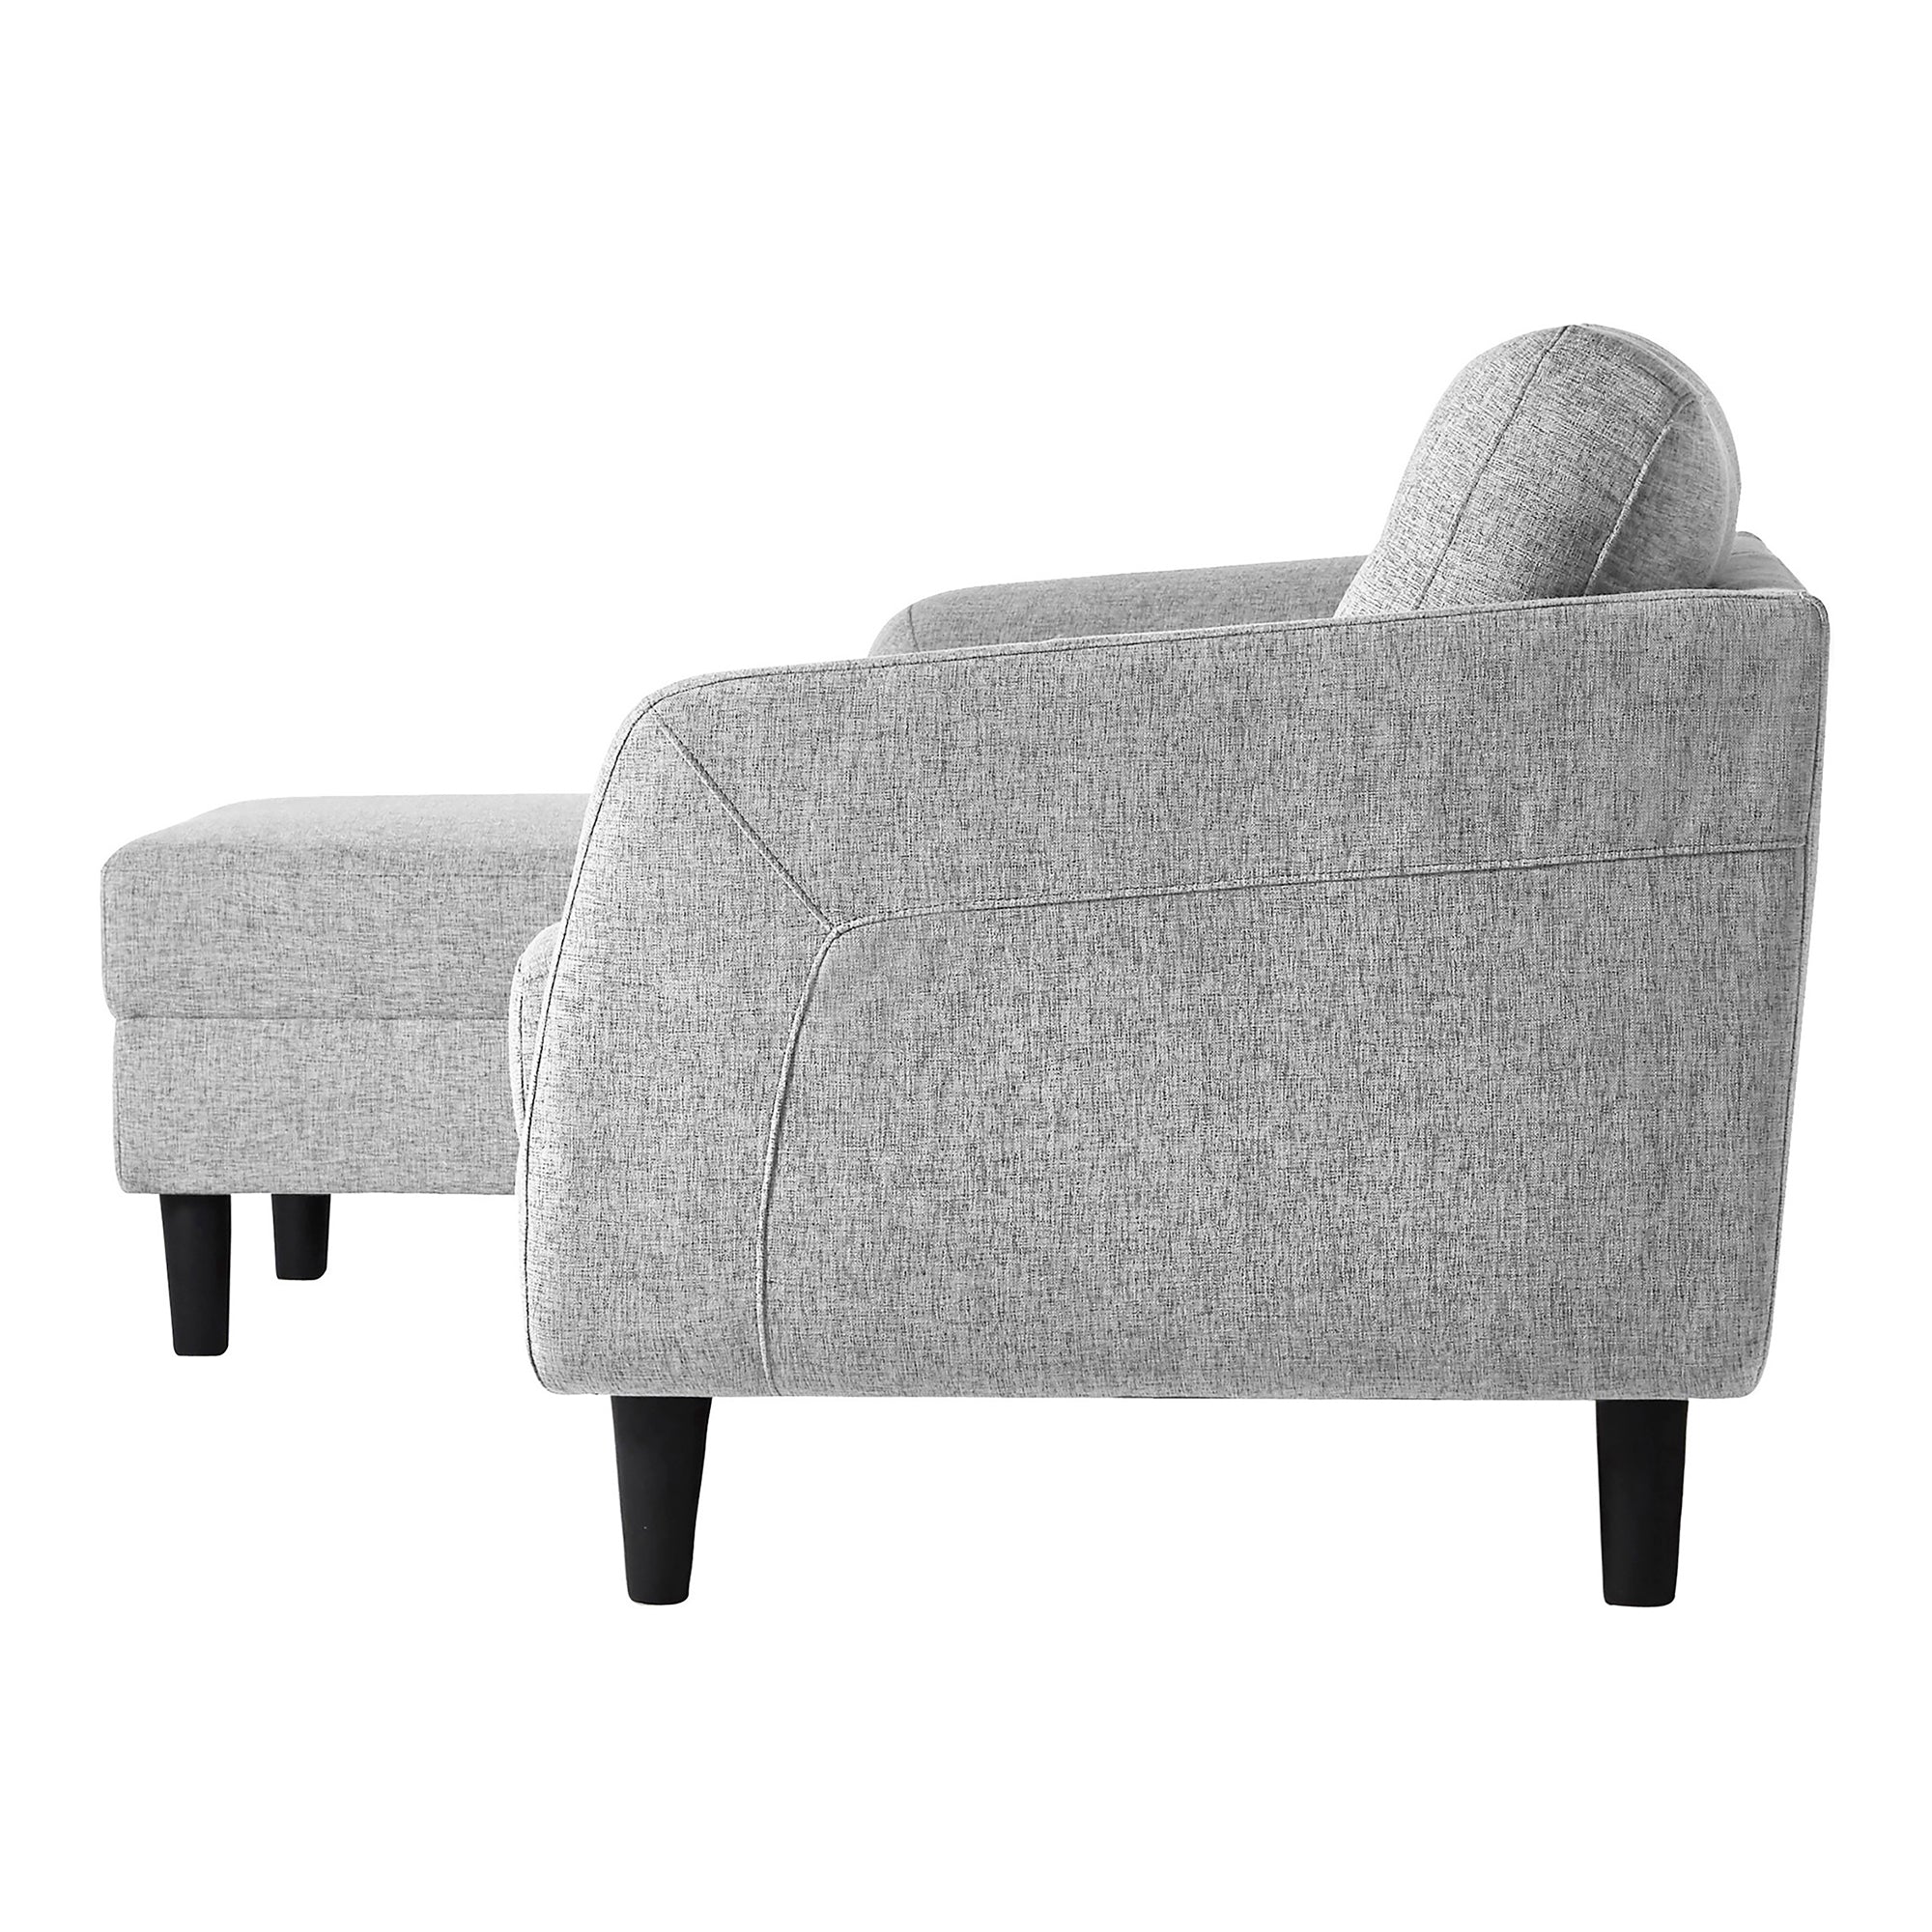 Belagio Sofa Bed With Chaise Left - Grey - - Furniture - Tipplergoods